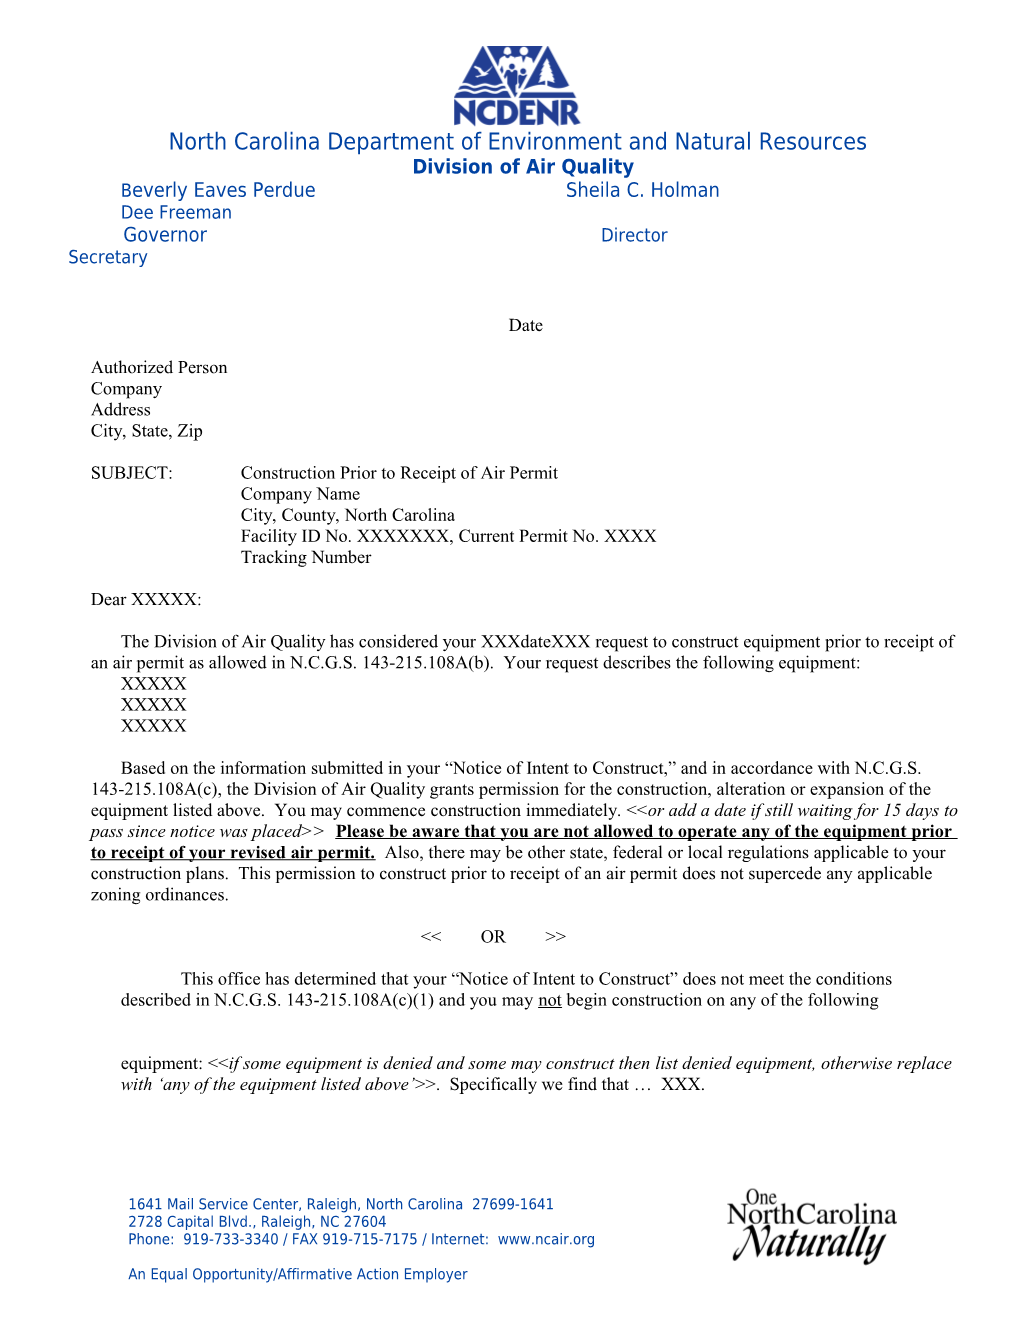 SUBJECT: Construction Prior to Receipt of Air Permit